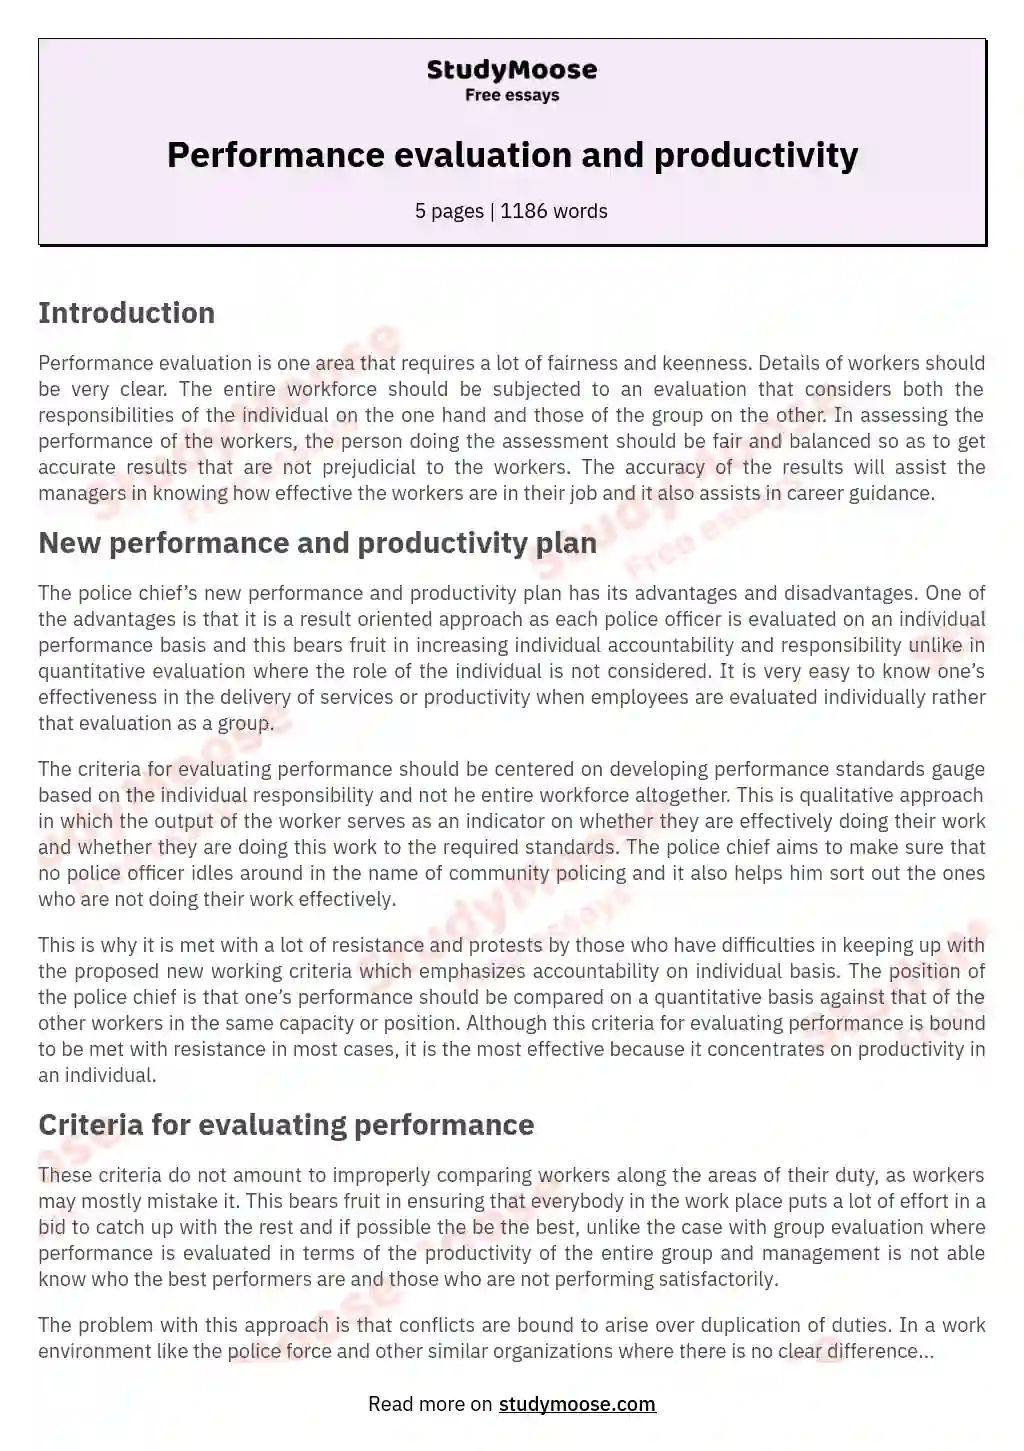 Performance evaluation and productivity essay